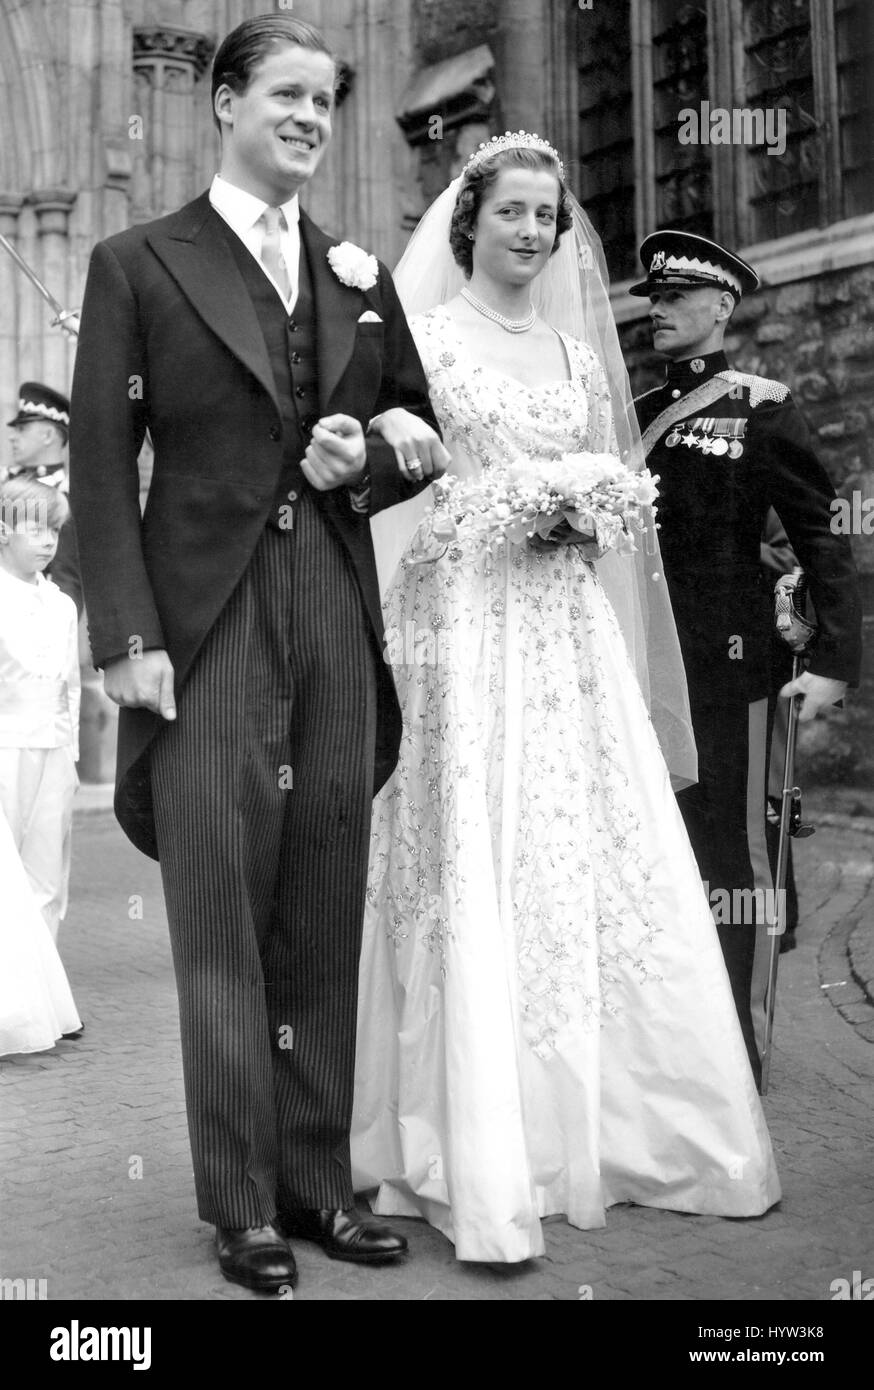 The 18-year-old bride and her bridegroom emerge from Westminster Abbey after the 'wedding of the year'. With the Queen, the Duke of Edinburgh and other members of the Royal family as guests, the former Miss Frances Roche, daughter of Lord and Lady Fermoy, was married in the Abbey to Viscount Althorp, 30, only son and heir of the Earl and Countess Spencer. Stock Photo